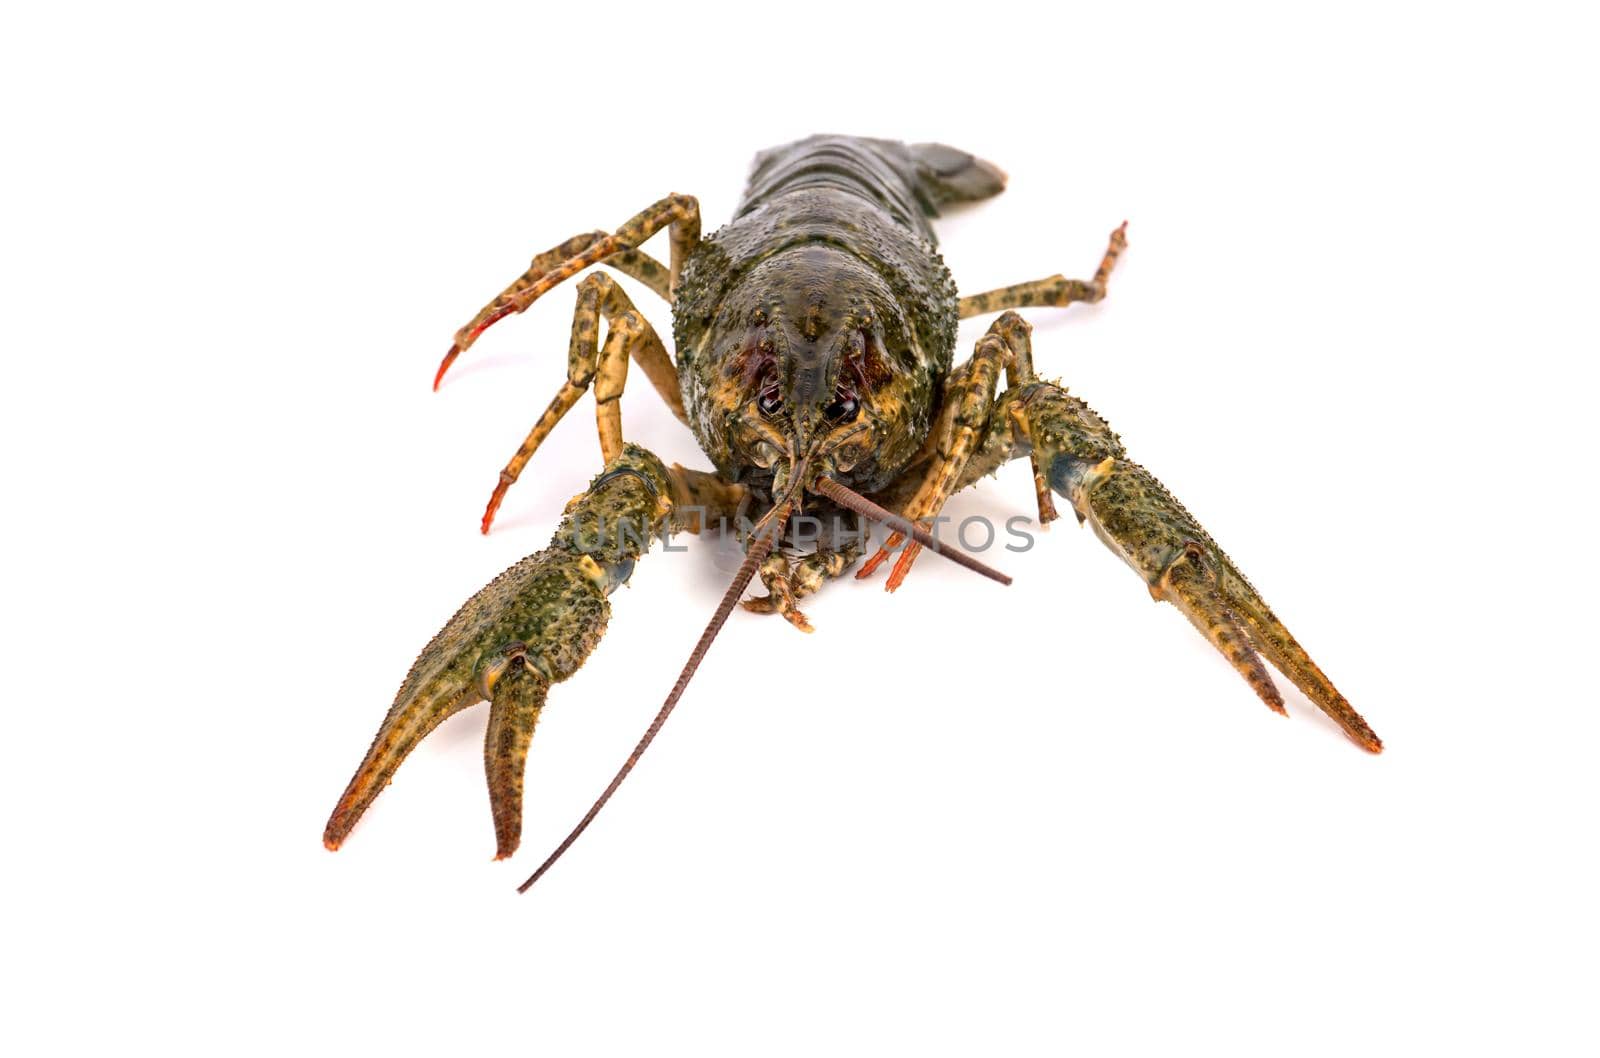 Living green crayfish on a white background foreground